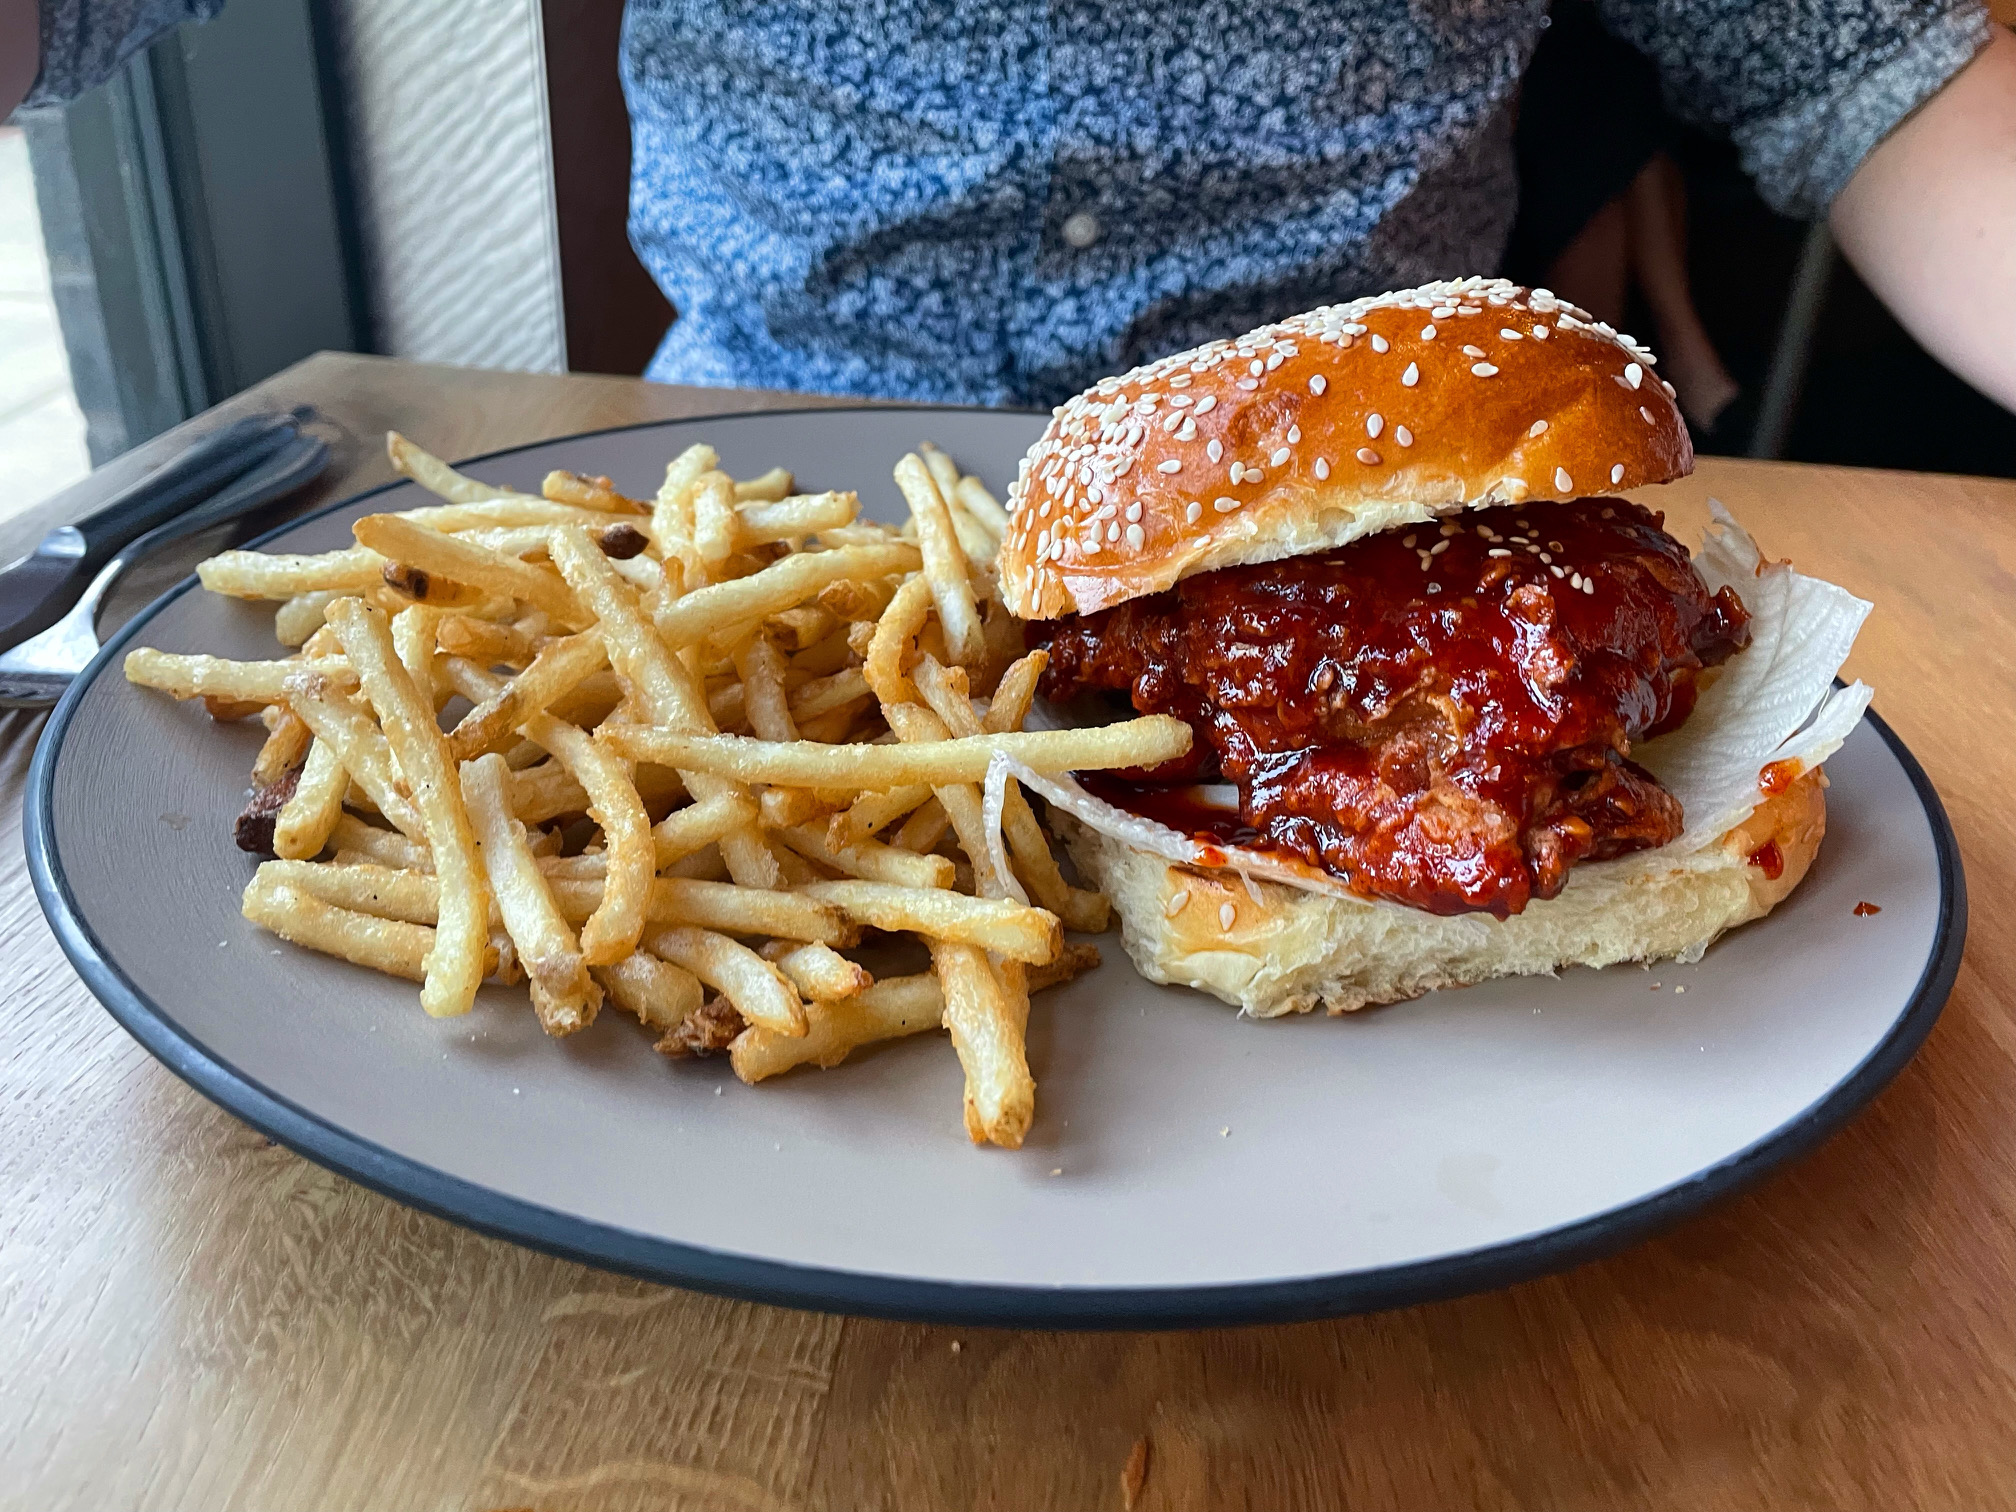 On a light wooden table, there is a gray plate with a big side of skinny fries beside a saucy Korean fried chicken sandwich on a sesame bun. Photo by Alyssa Buckley.